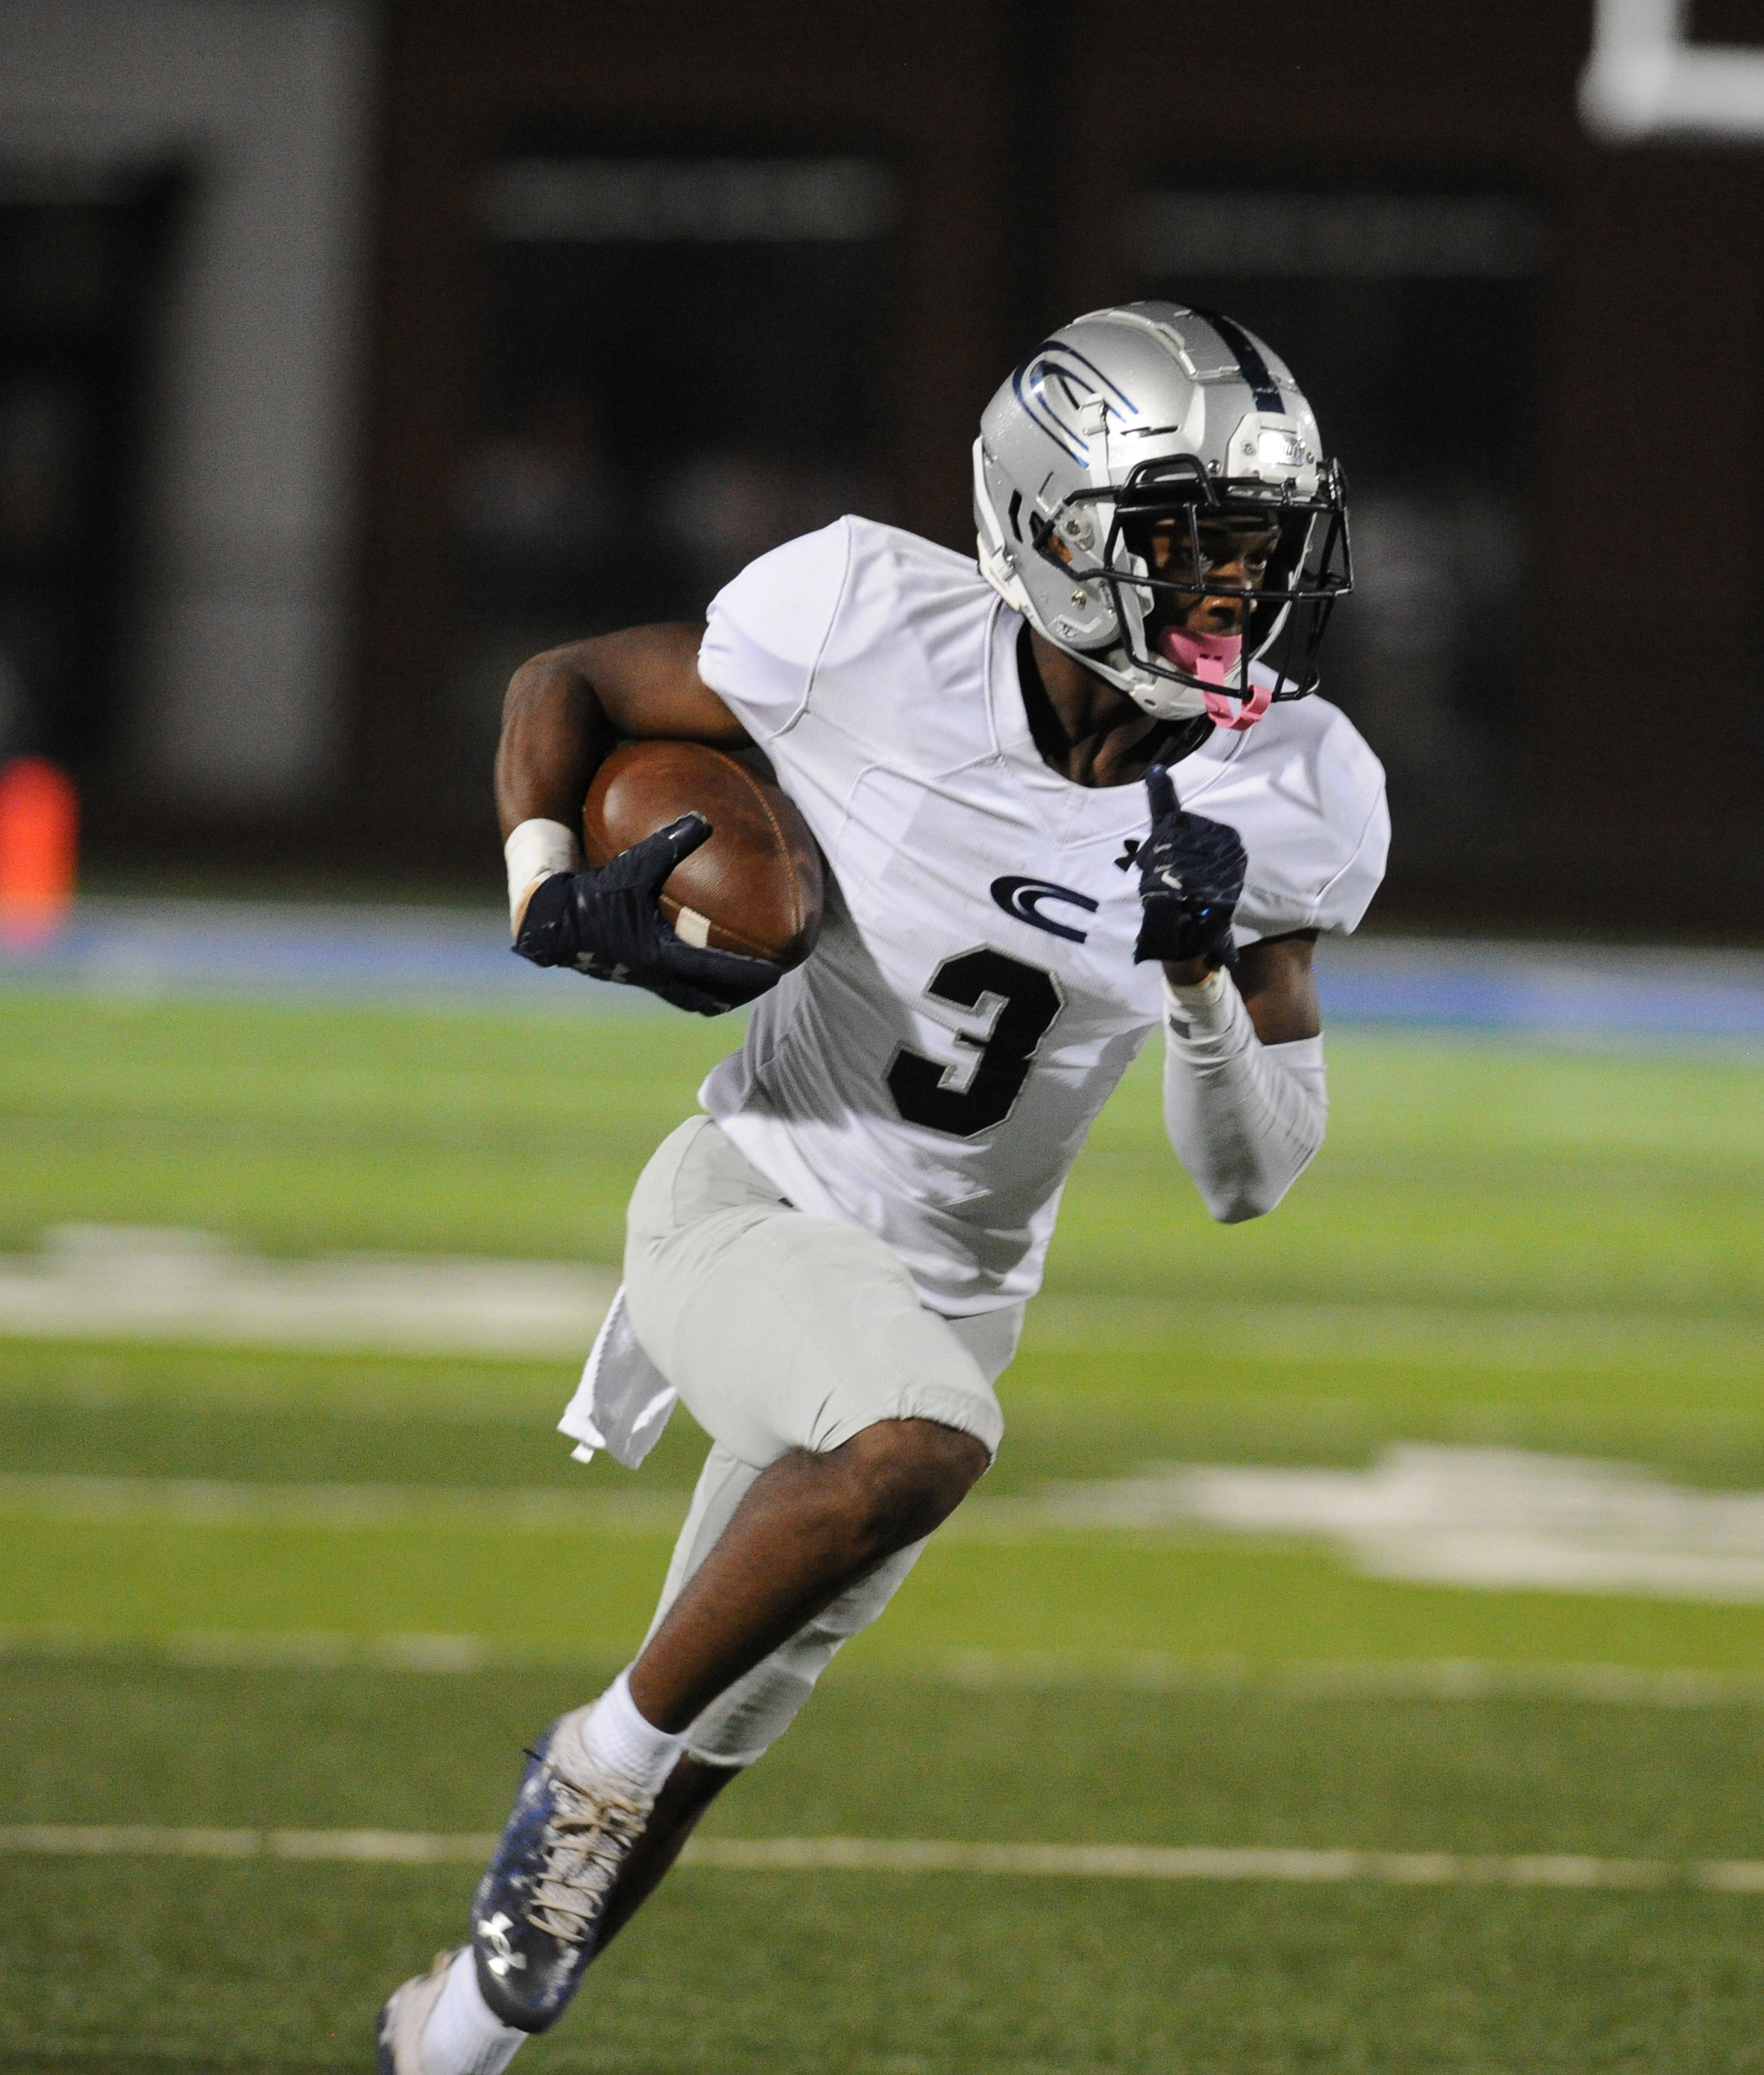 Clay-Chalkville WR commits to Tennessee